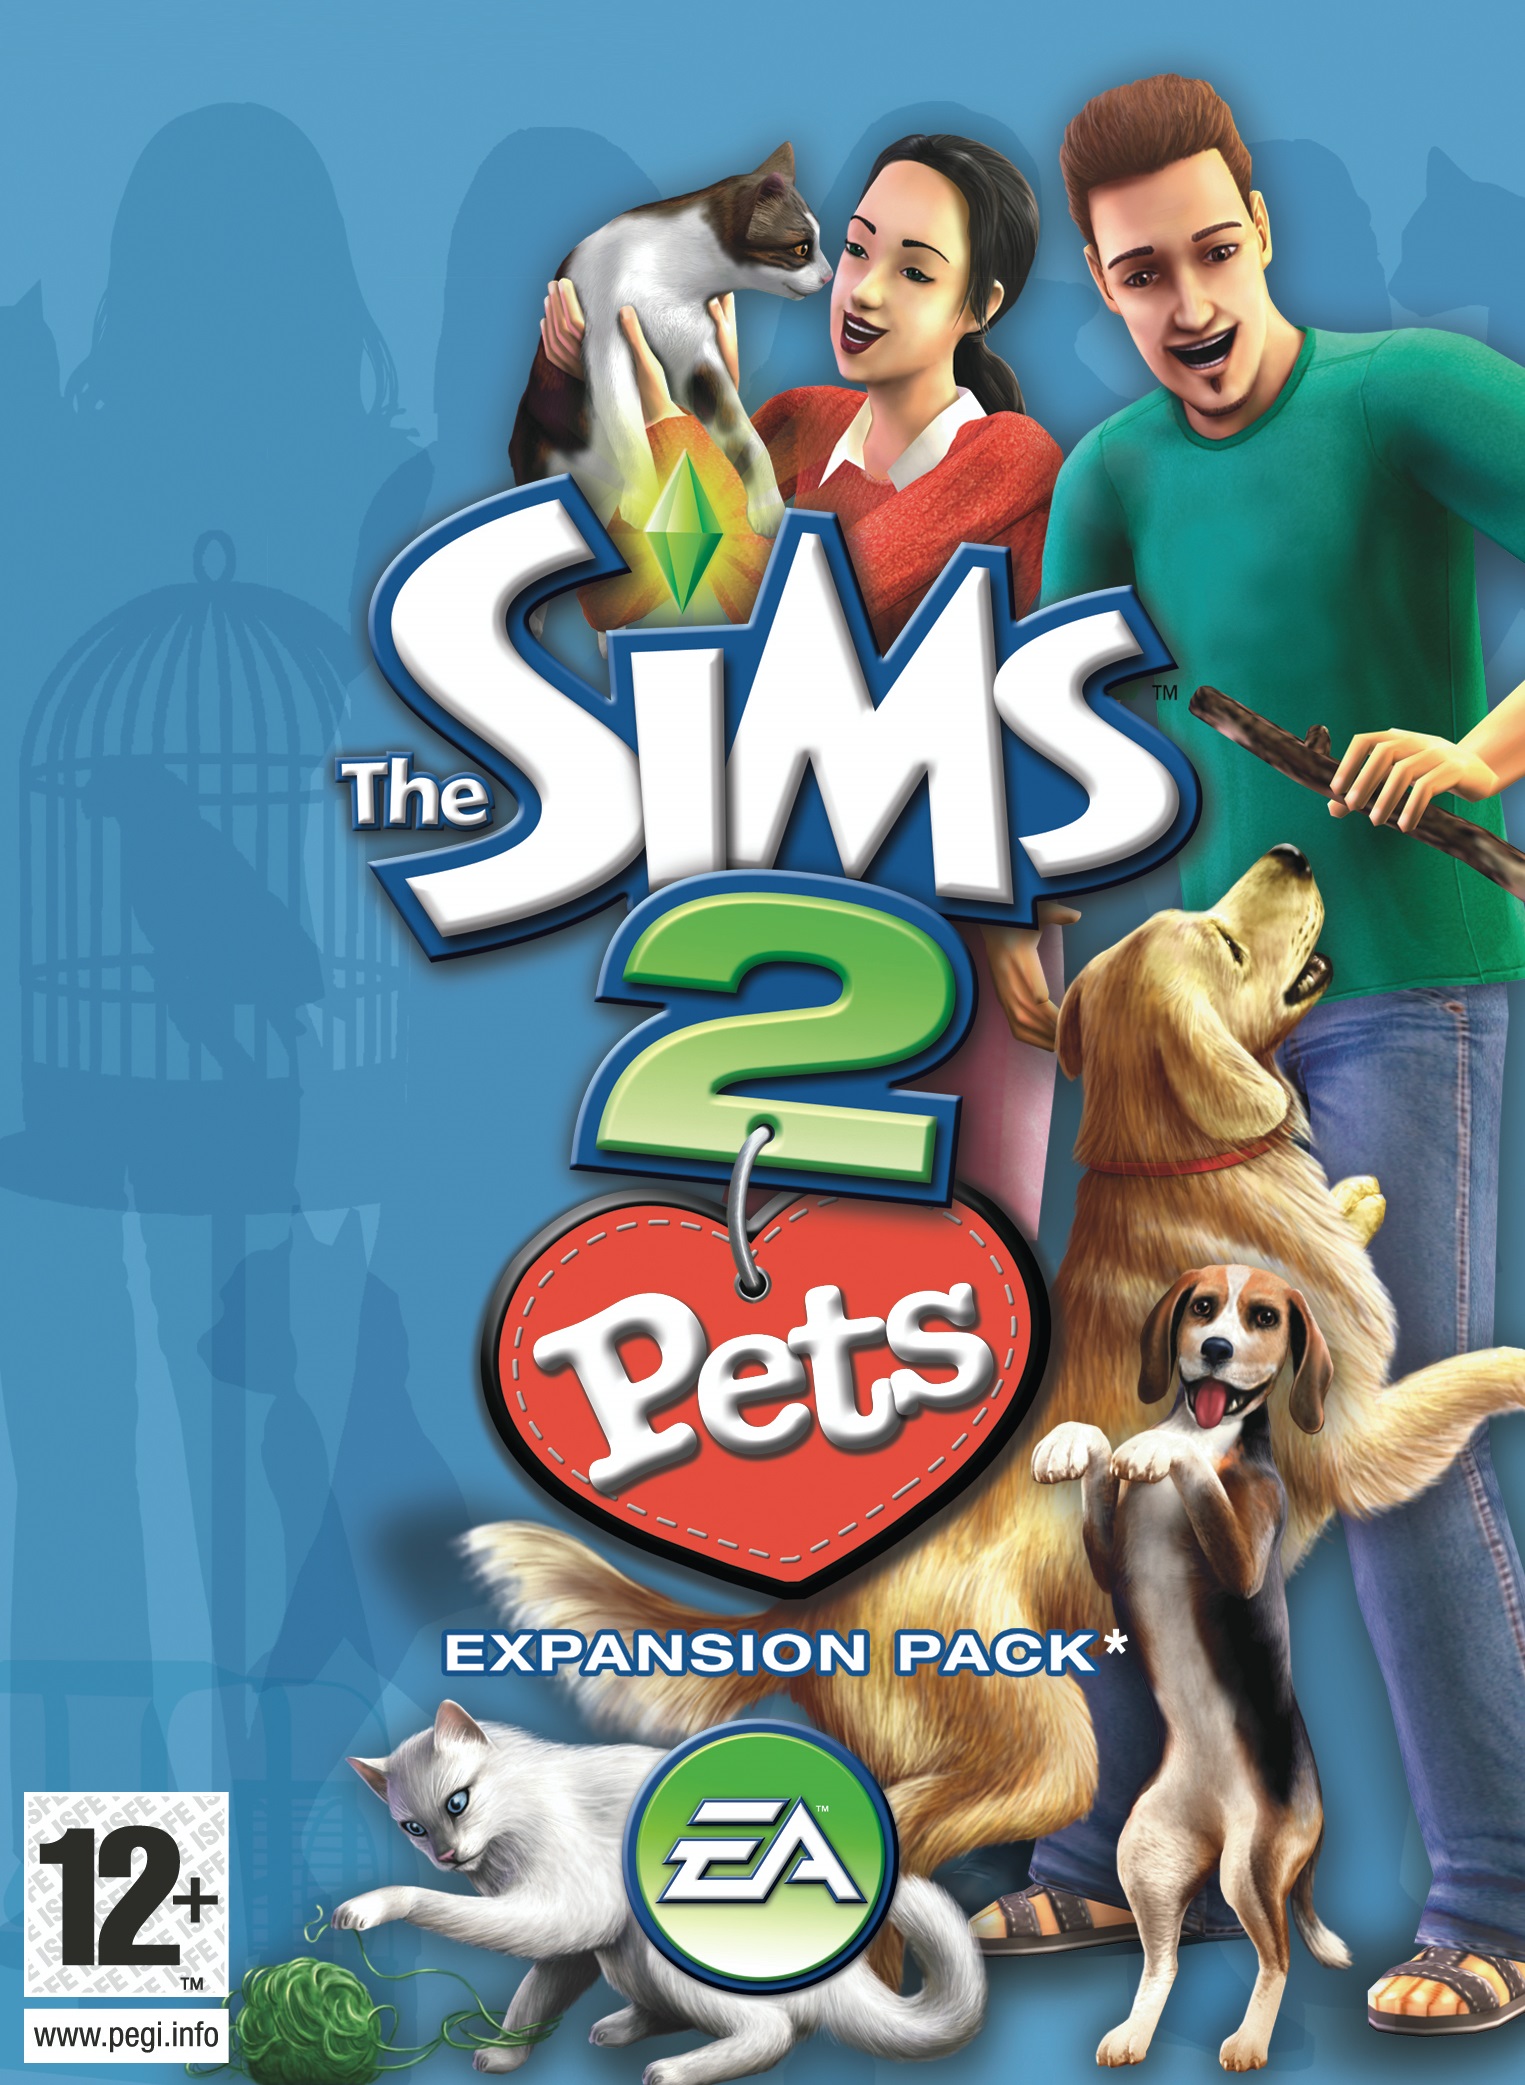 Legacy Games Simulation Games for PC: My Universe: Pets (2 Game Pack) - PC  DVD with Digital Download Codes